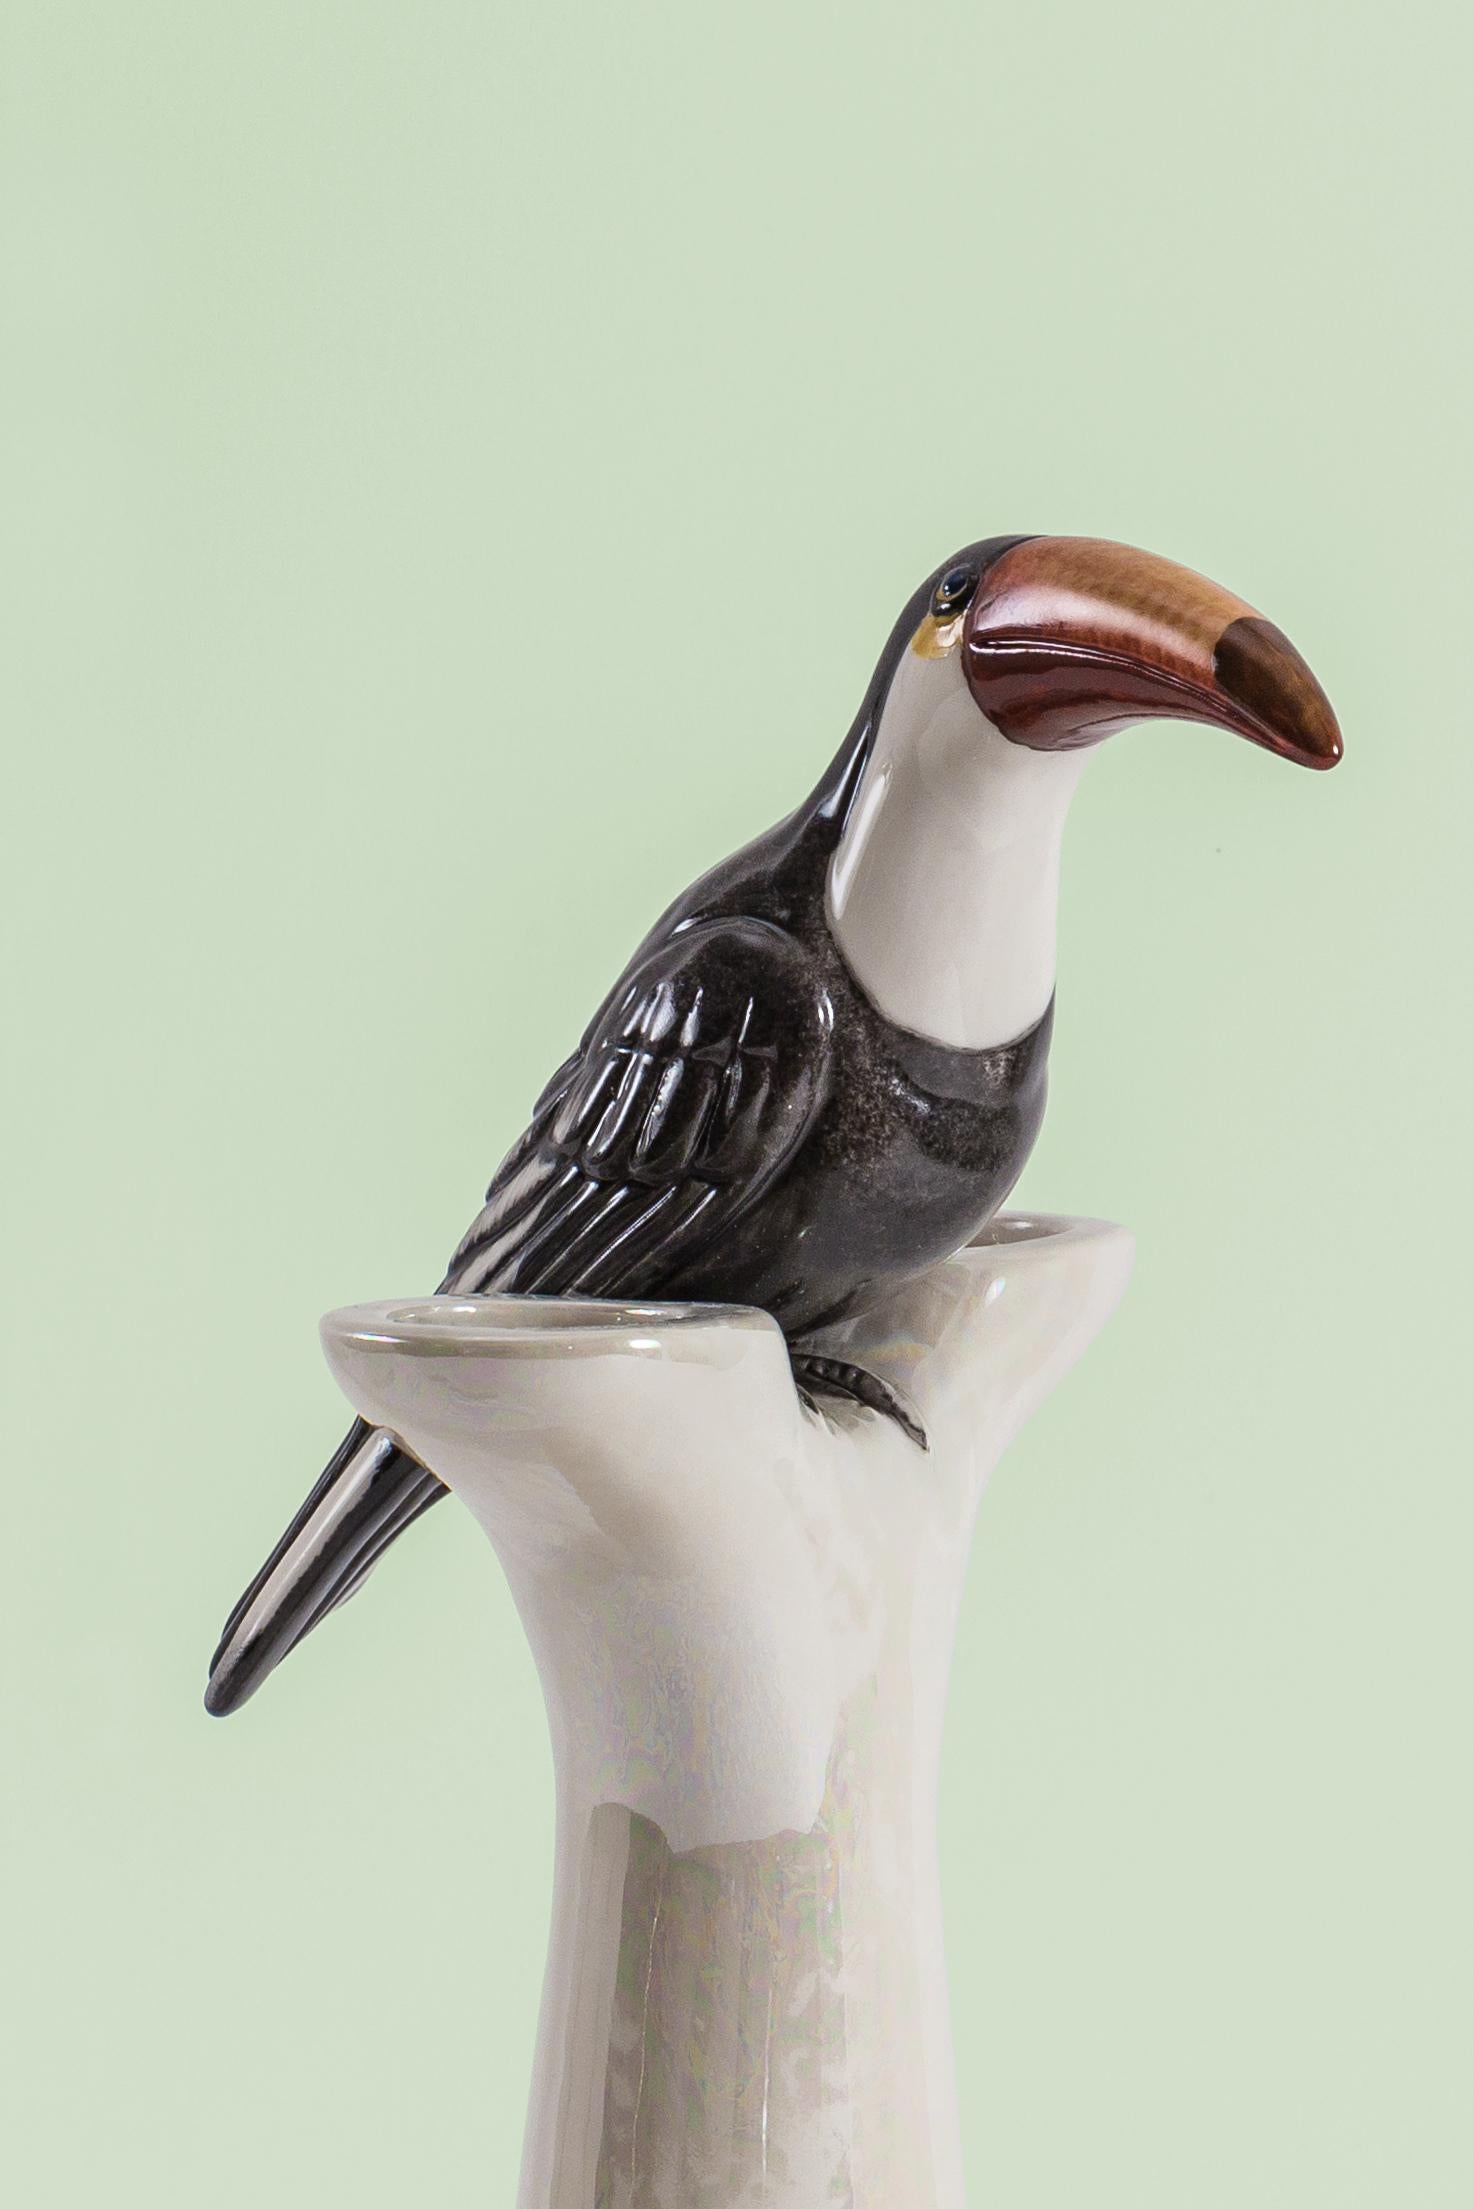 This Italian porcelain sculpture is part of Grand Tour by Vito Nesta. Made in Capodimonte porcelain with a glossy and iridescent finish. this double candle holder is embellished by a hand painted toucan.